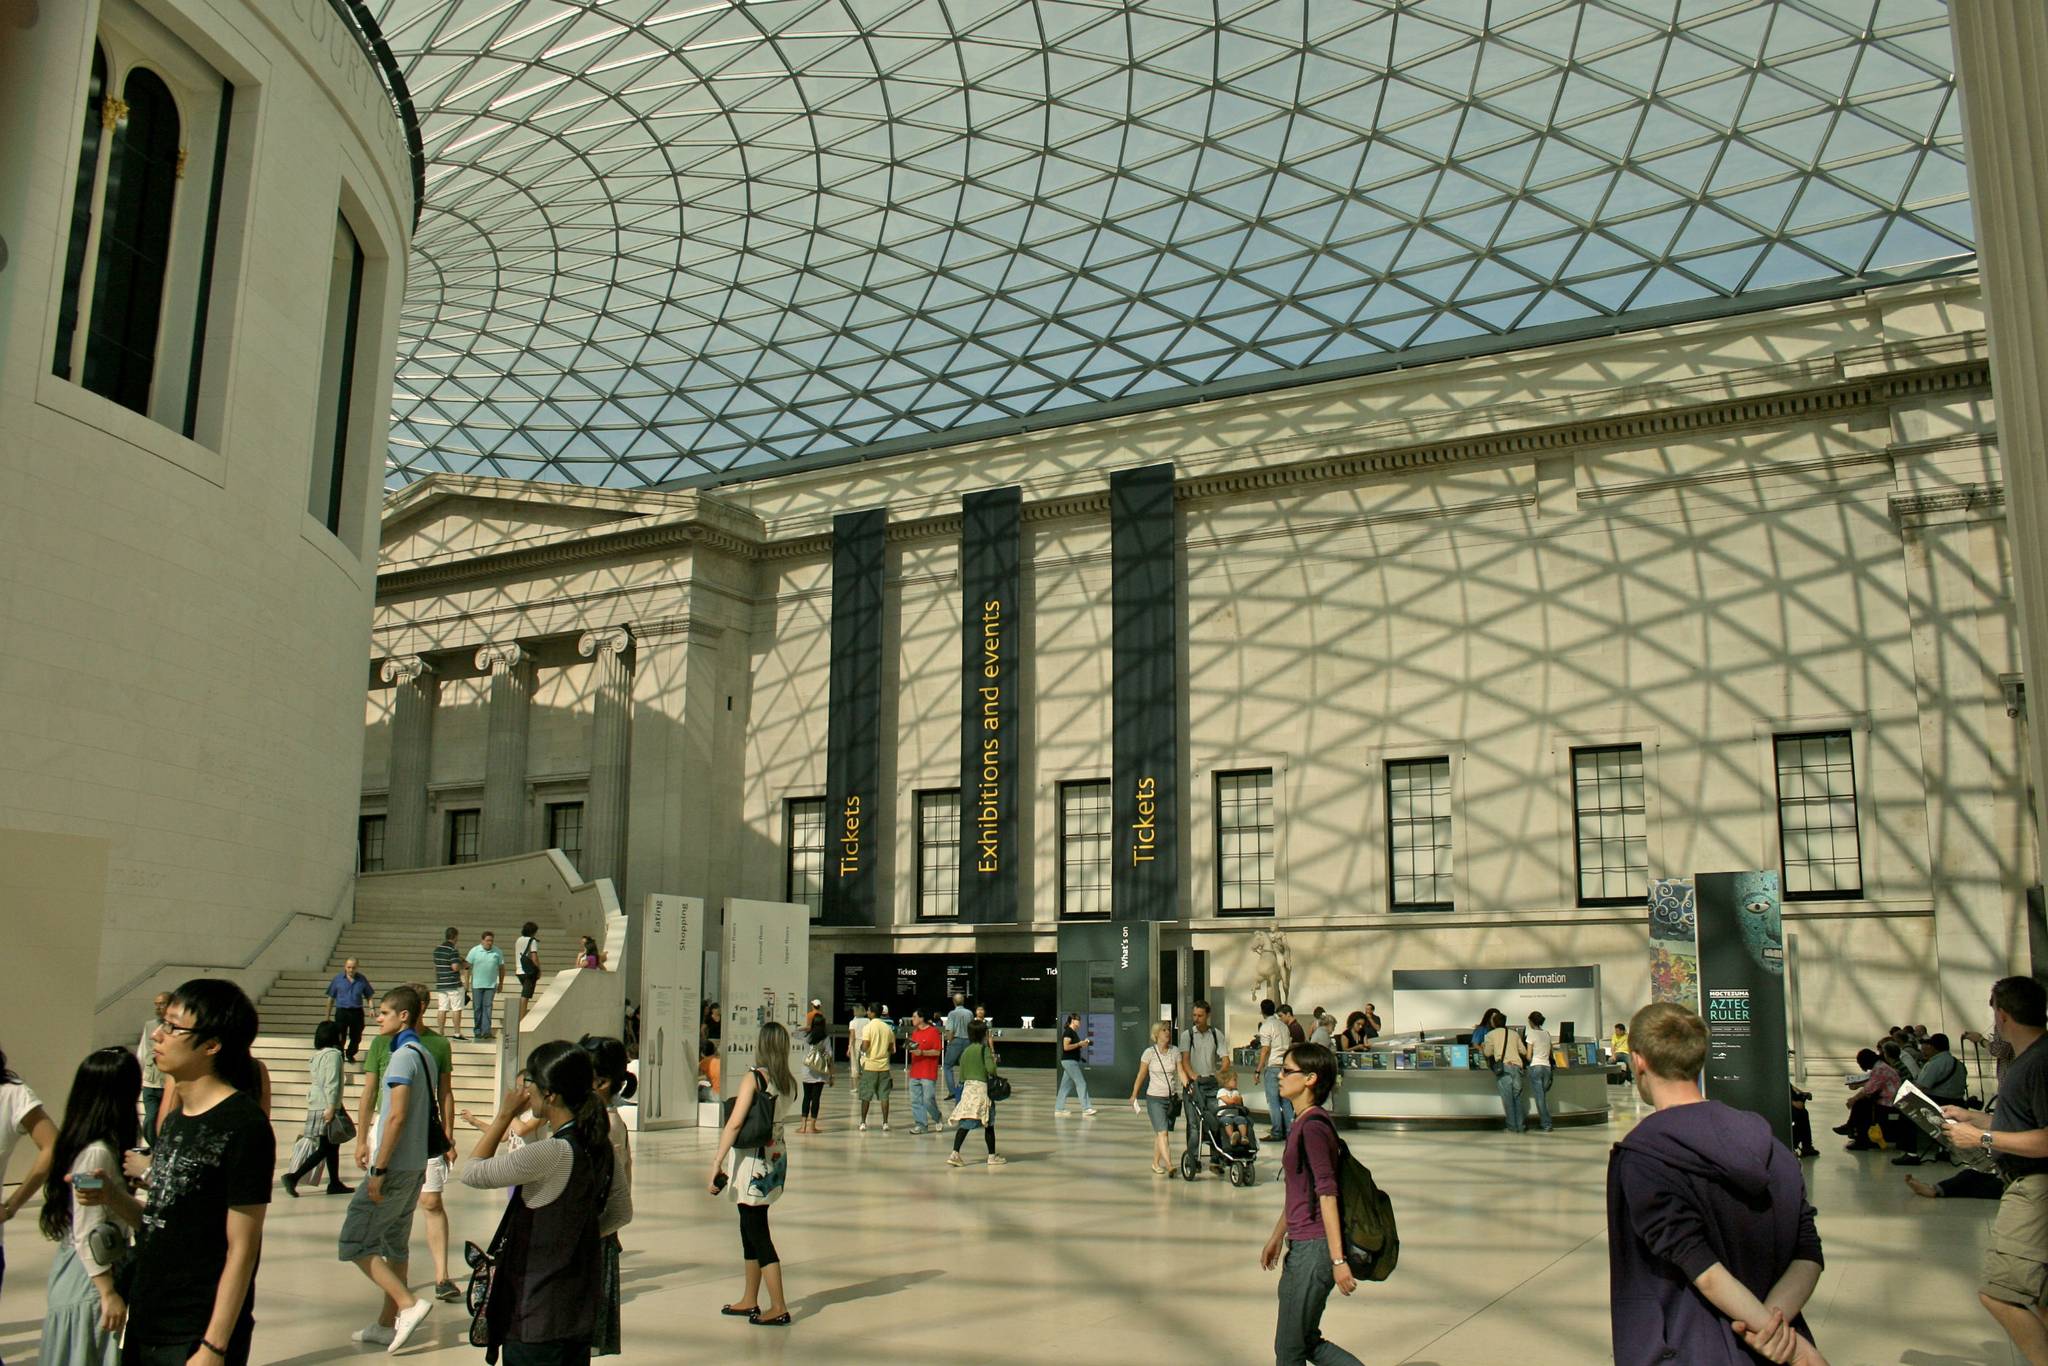 Take a tour of the British Museum online